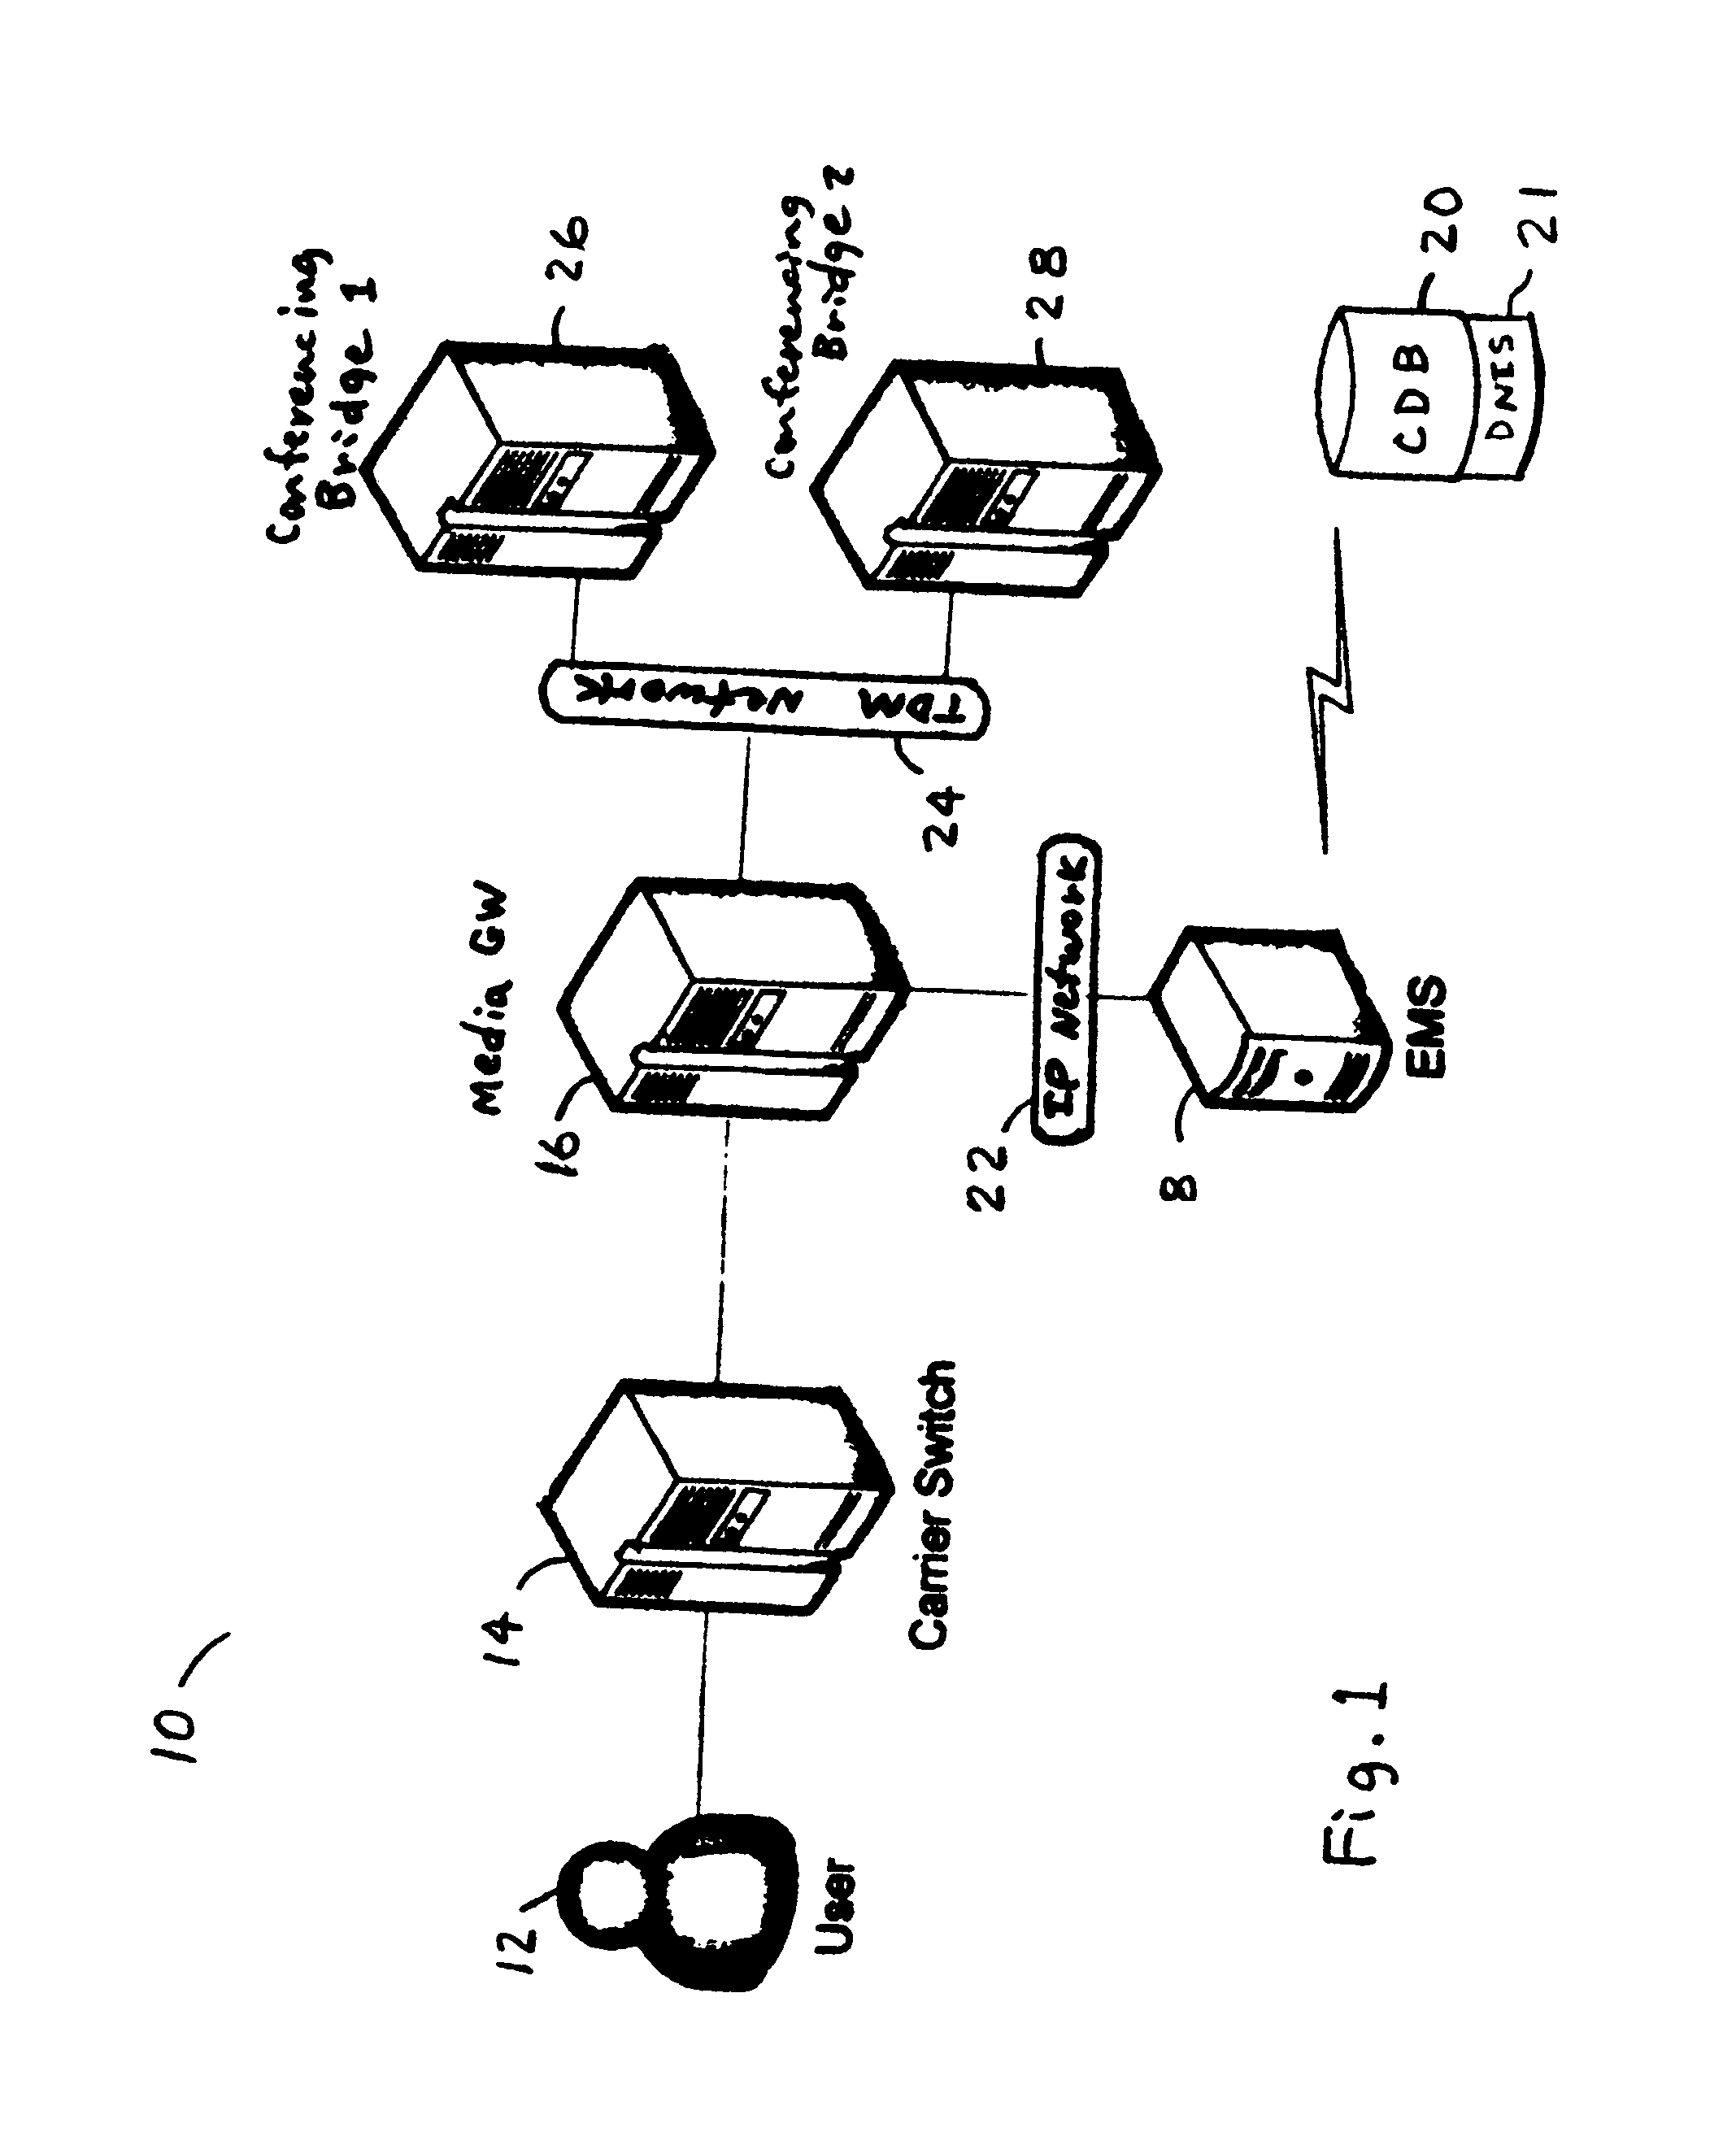 Method, system, and computer readable medium for translating and redirecting calls